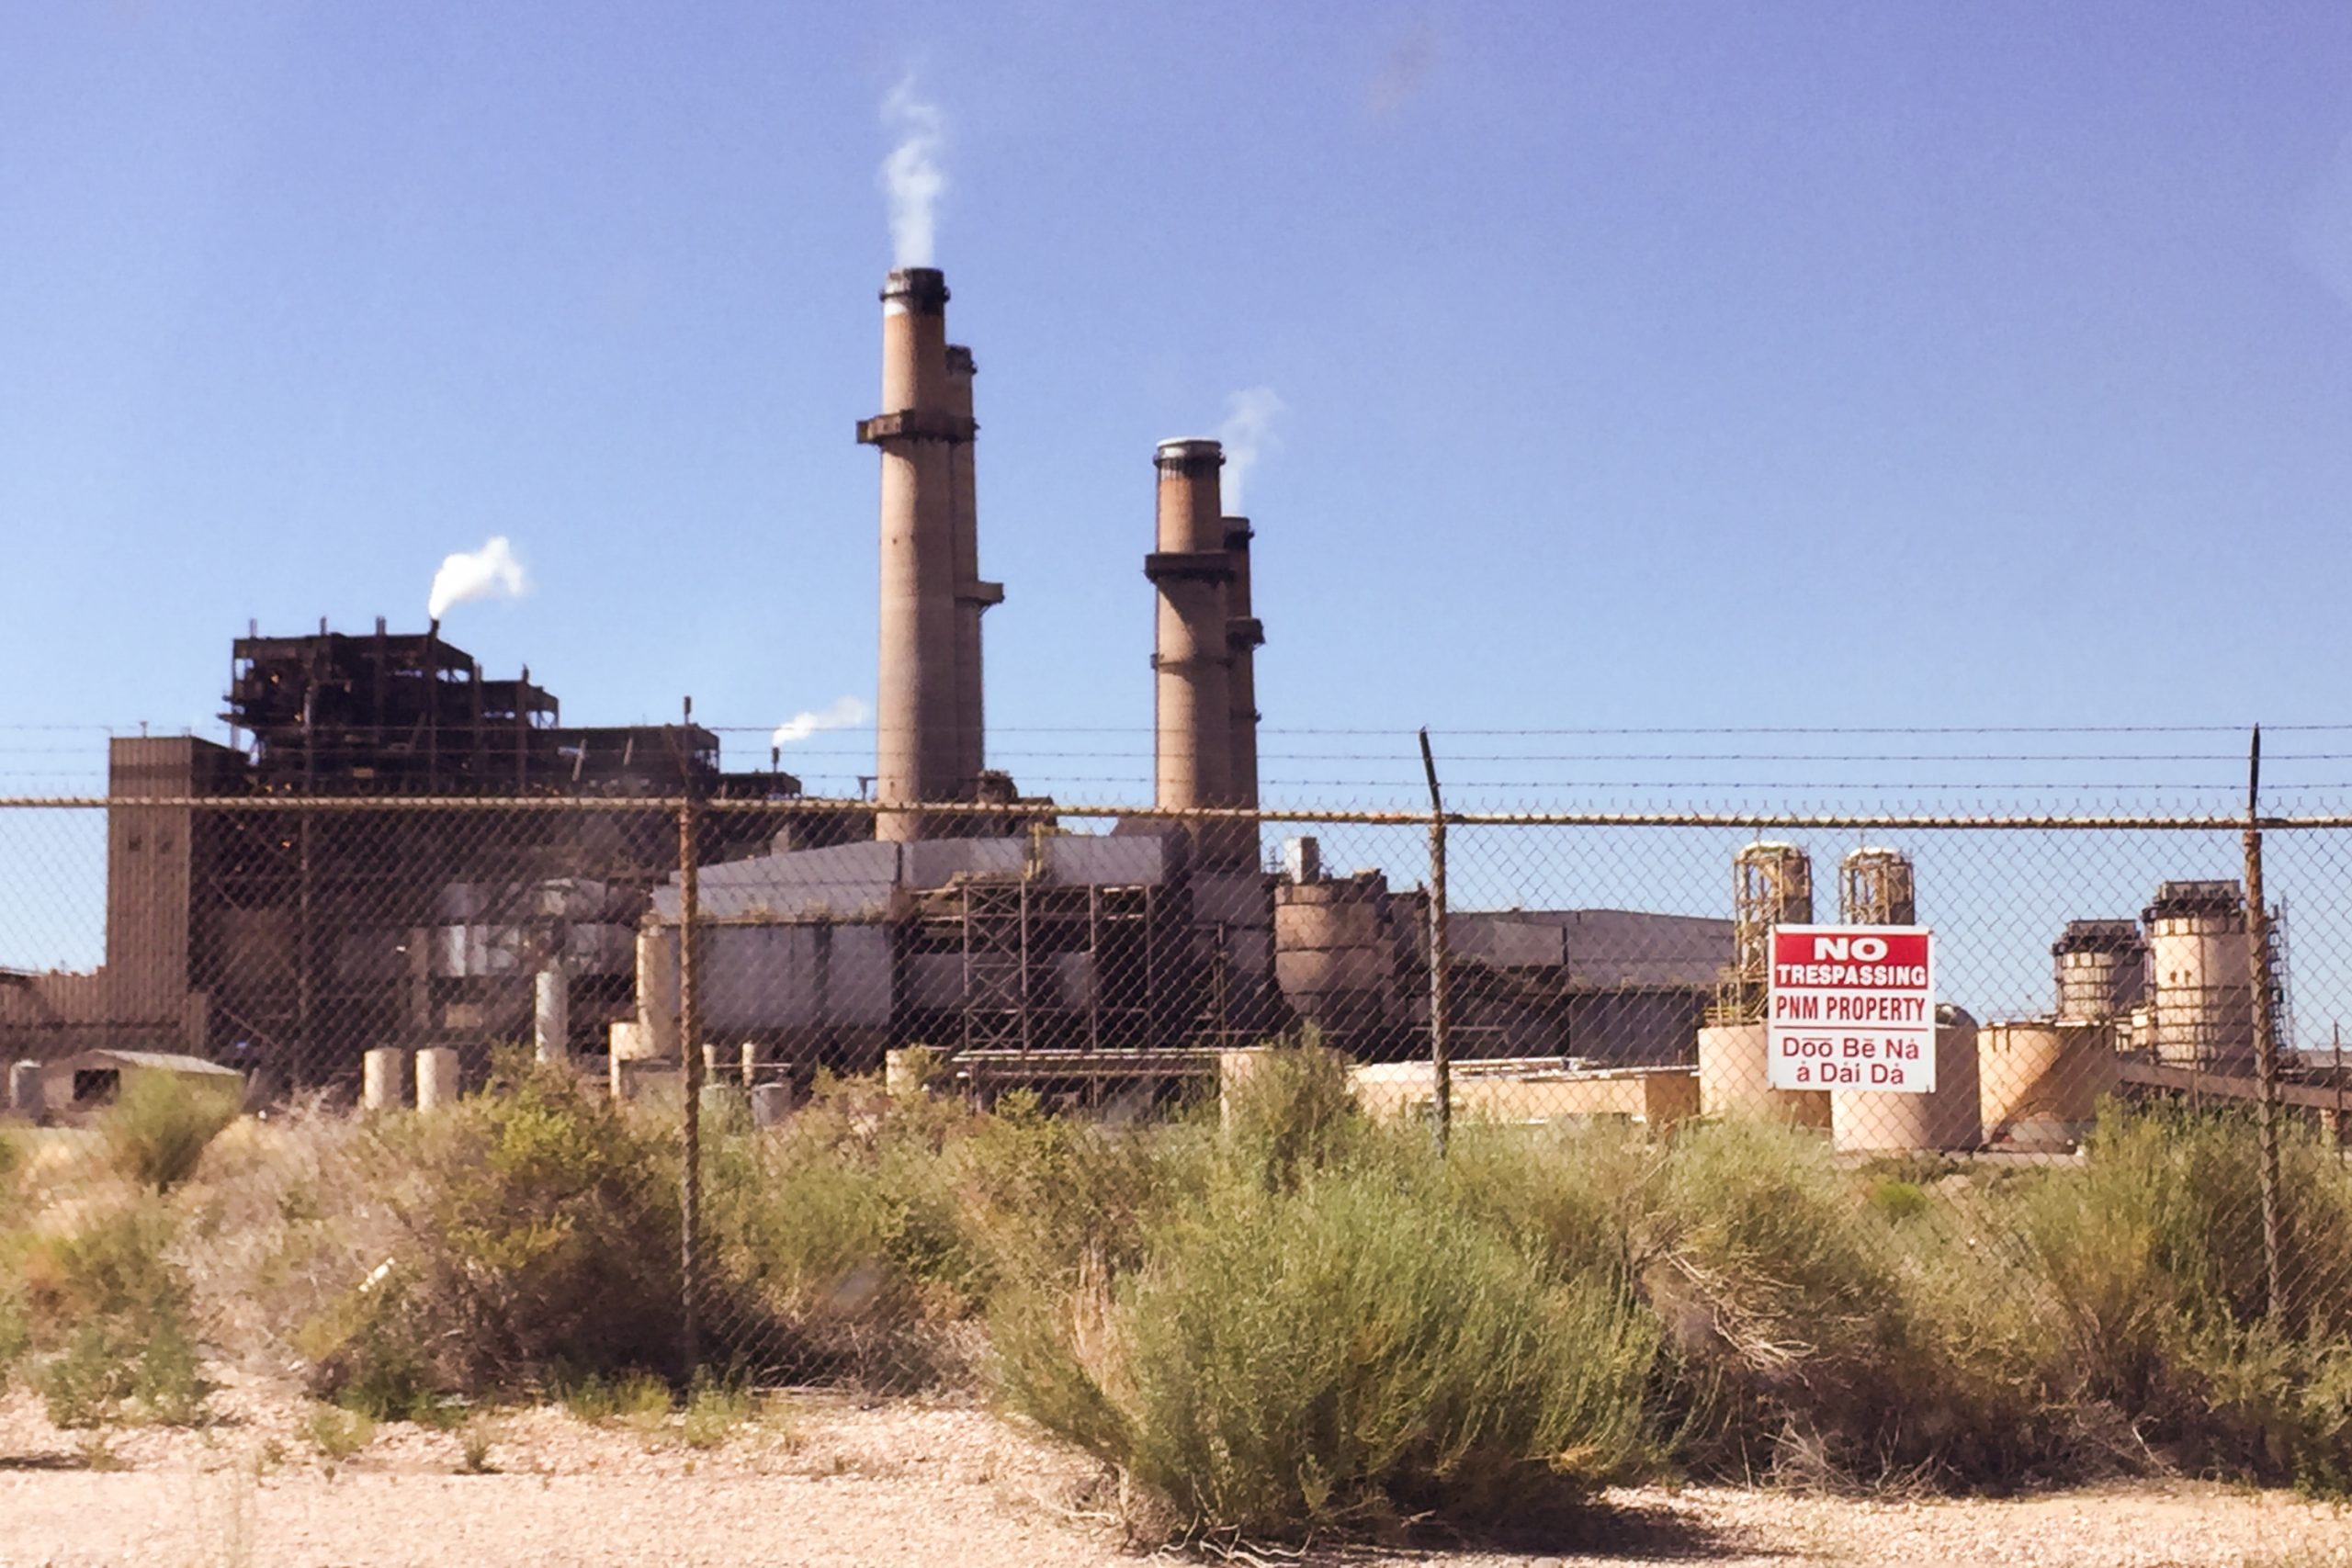 Dysfunction at the PRC puts New Mexico’s clean energy plan at risk